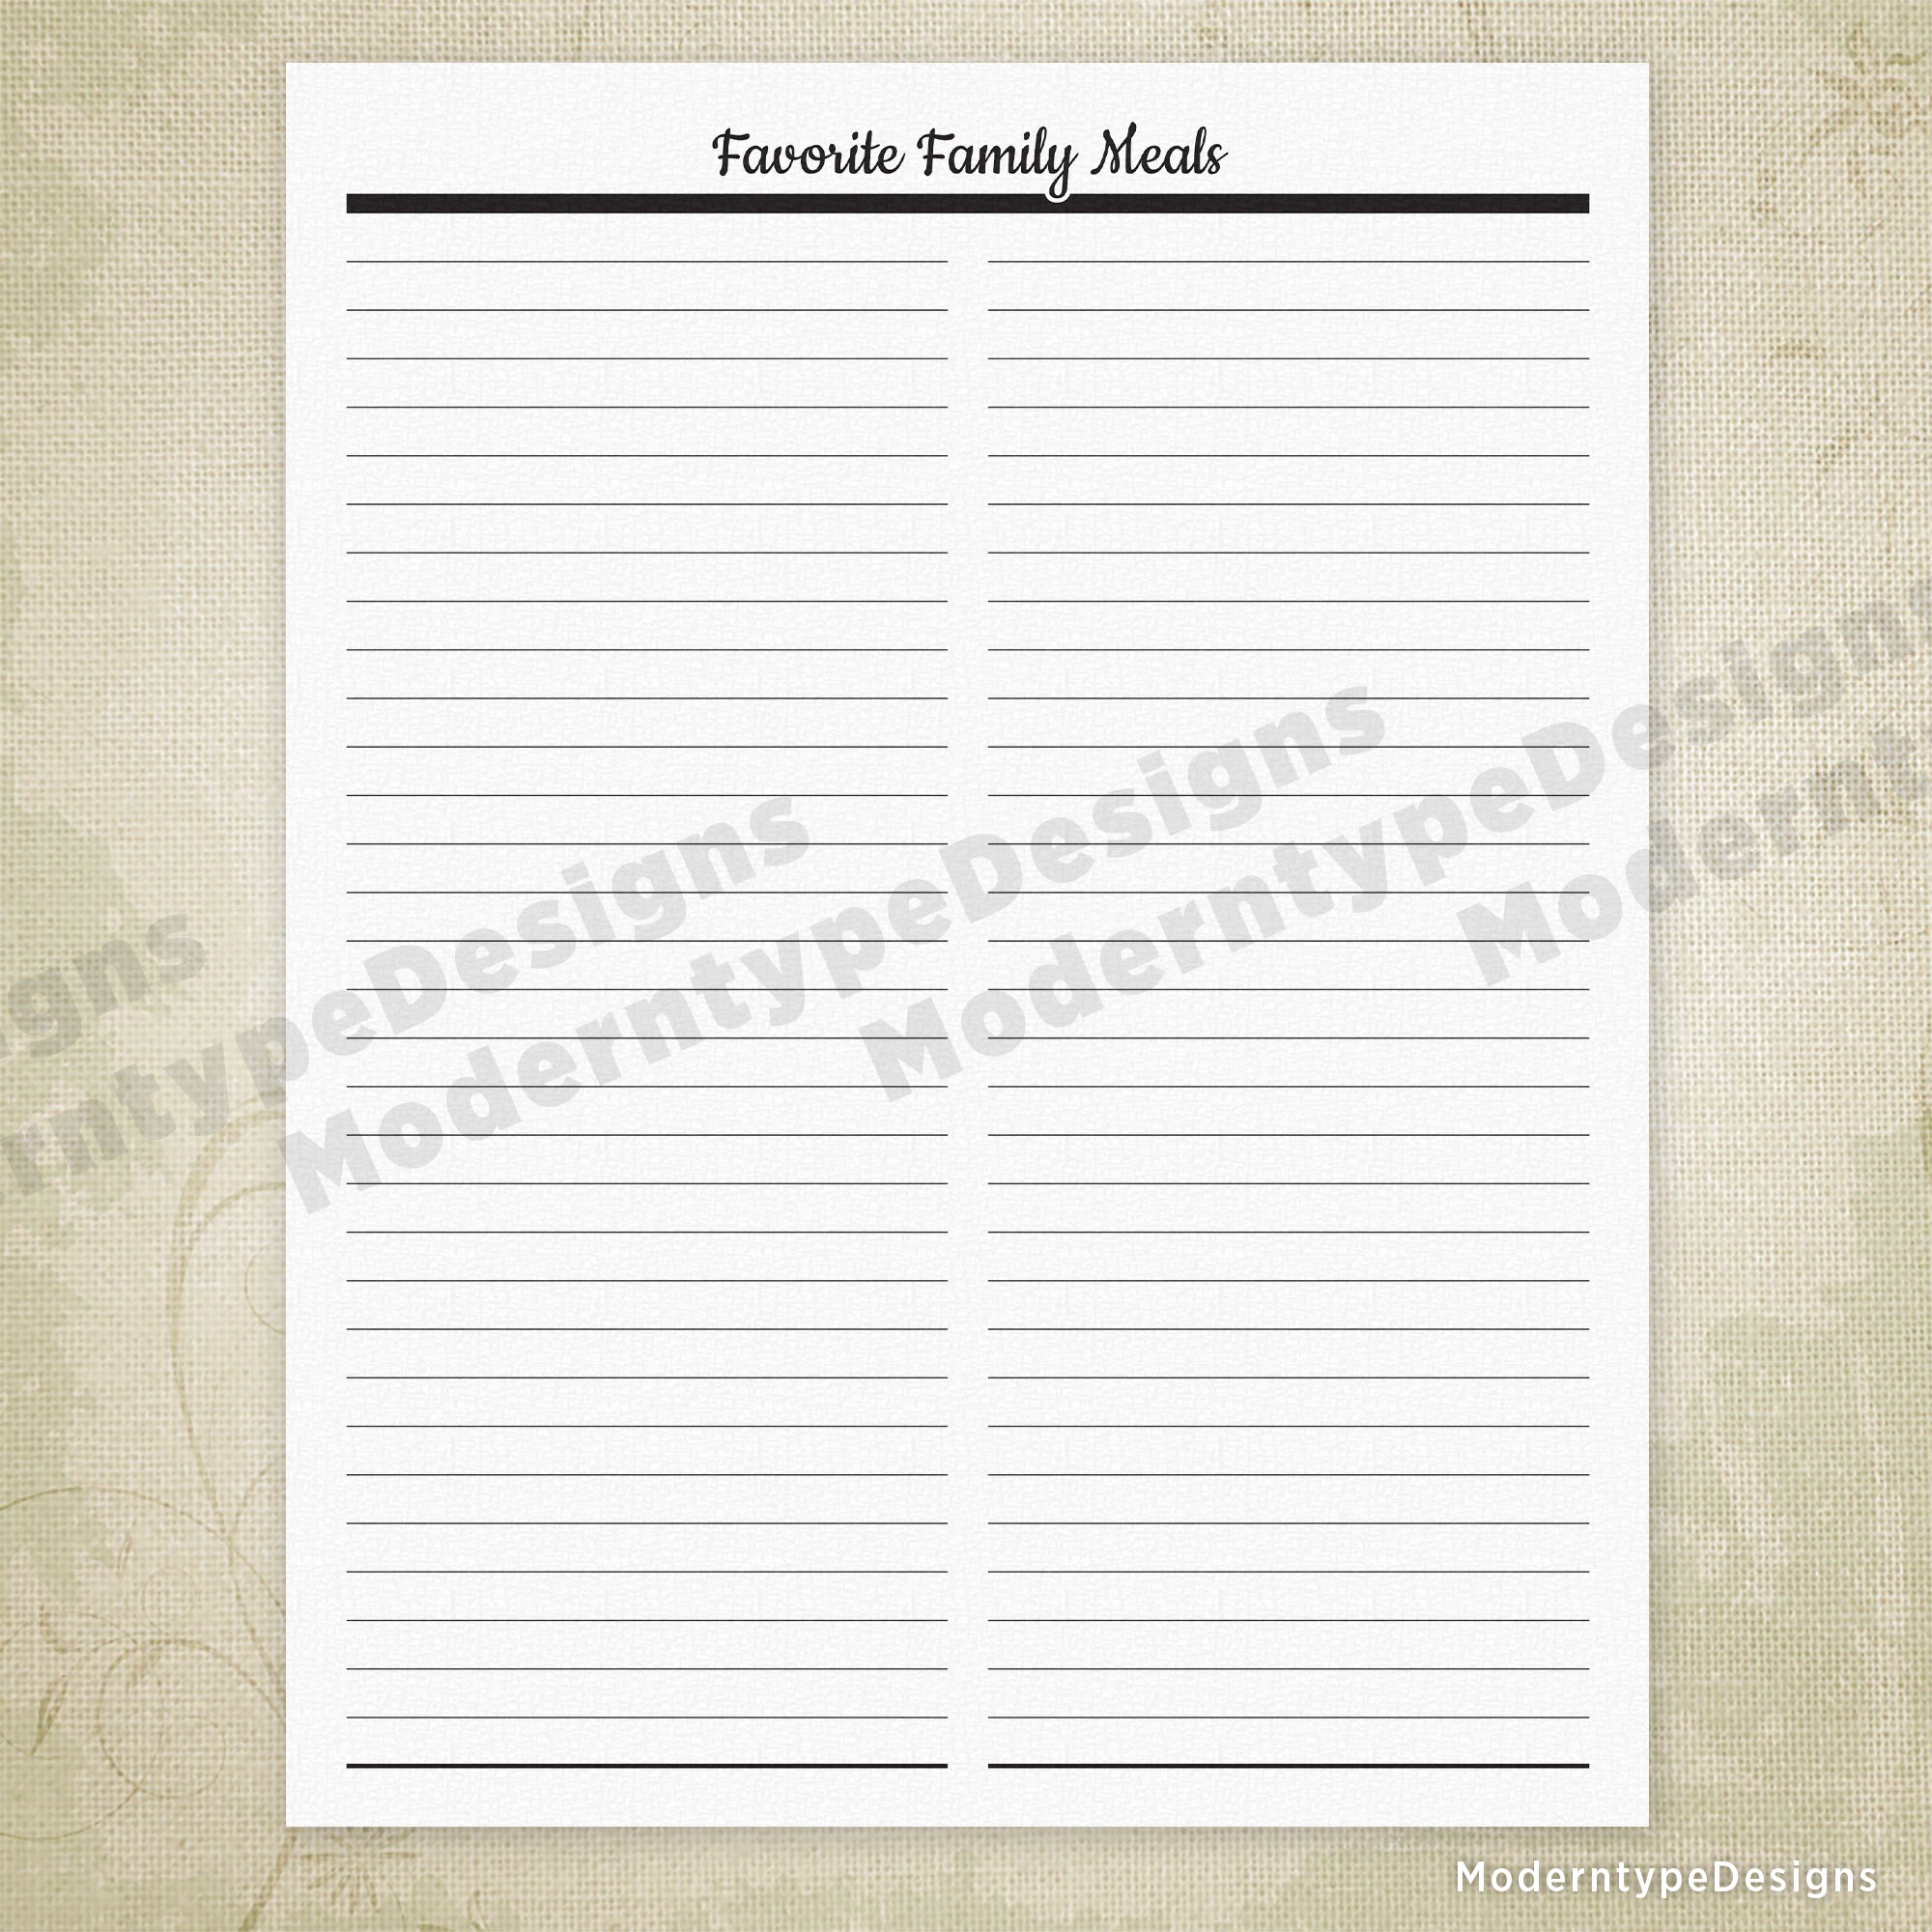 Favorite Family Meals Printable